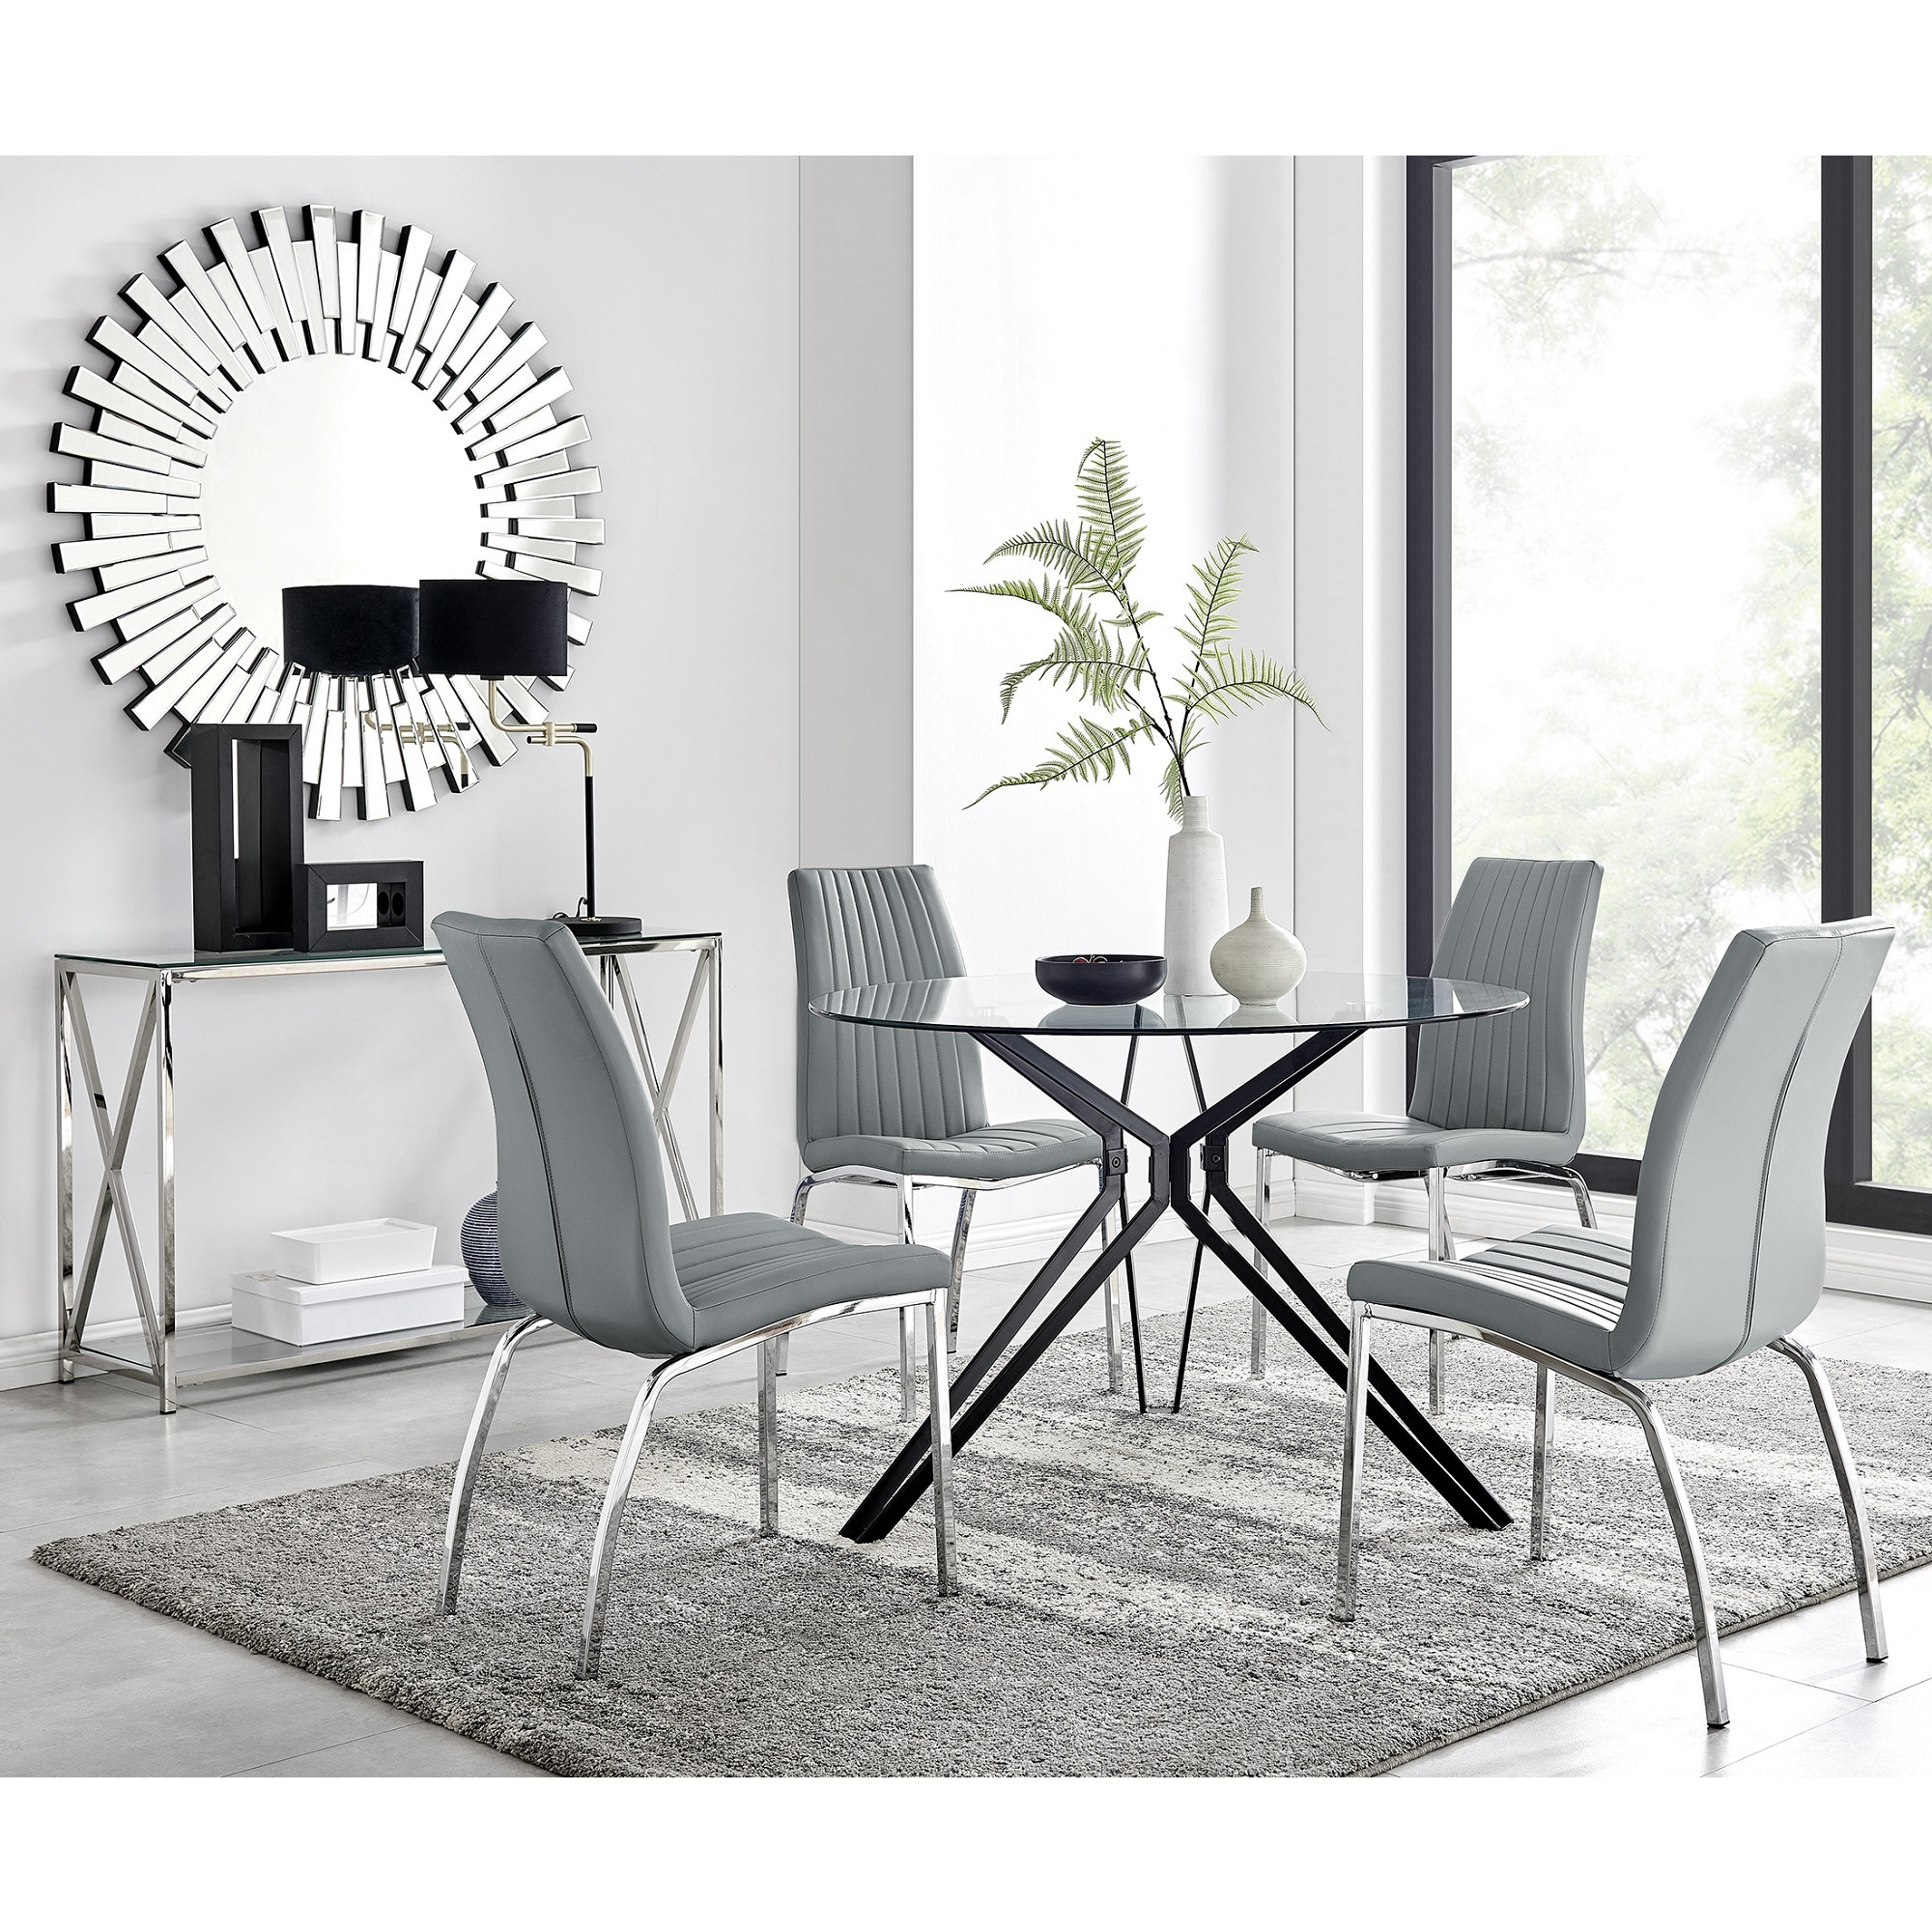 Cascina Dining Table and 4 Isco Chairs - Furniturebox